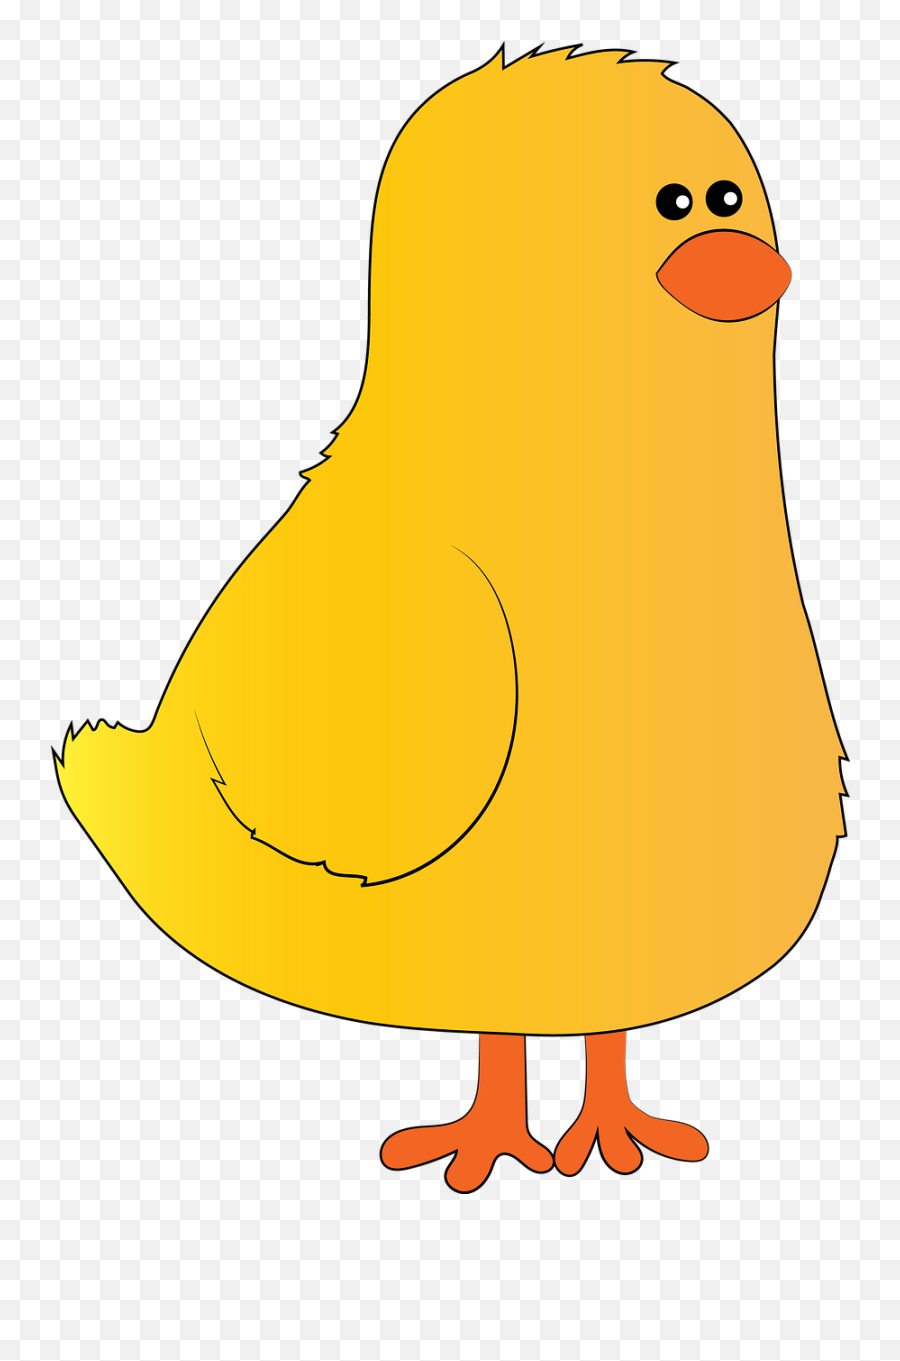 Chick Farm Hen - Free Image On Pixabay Cartoon Png,Chick Png